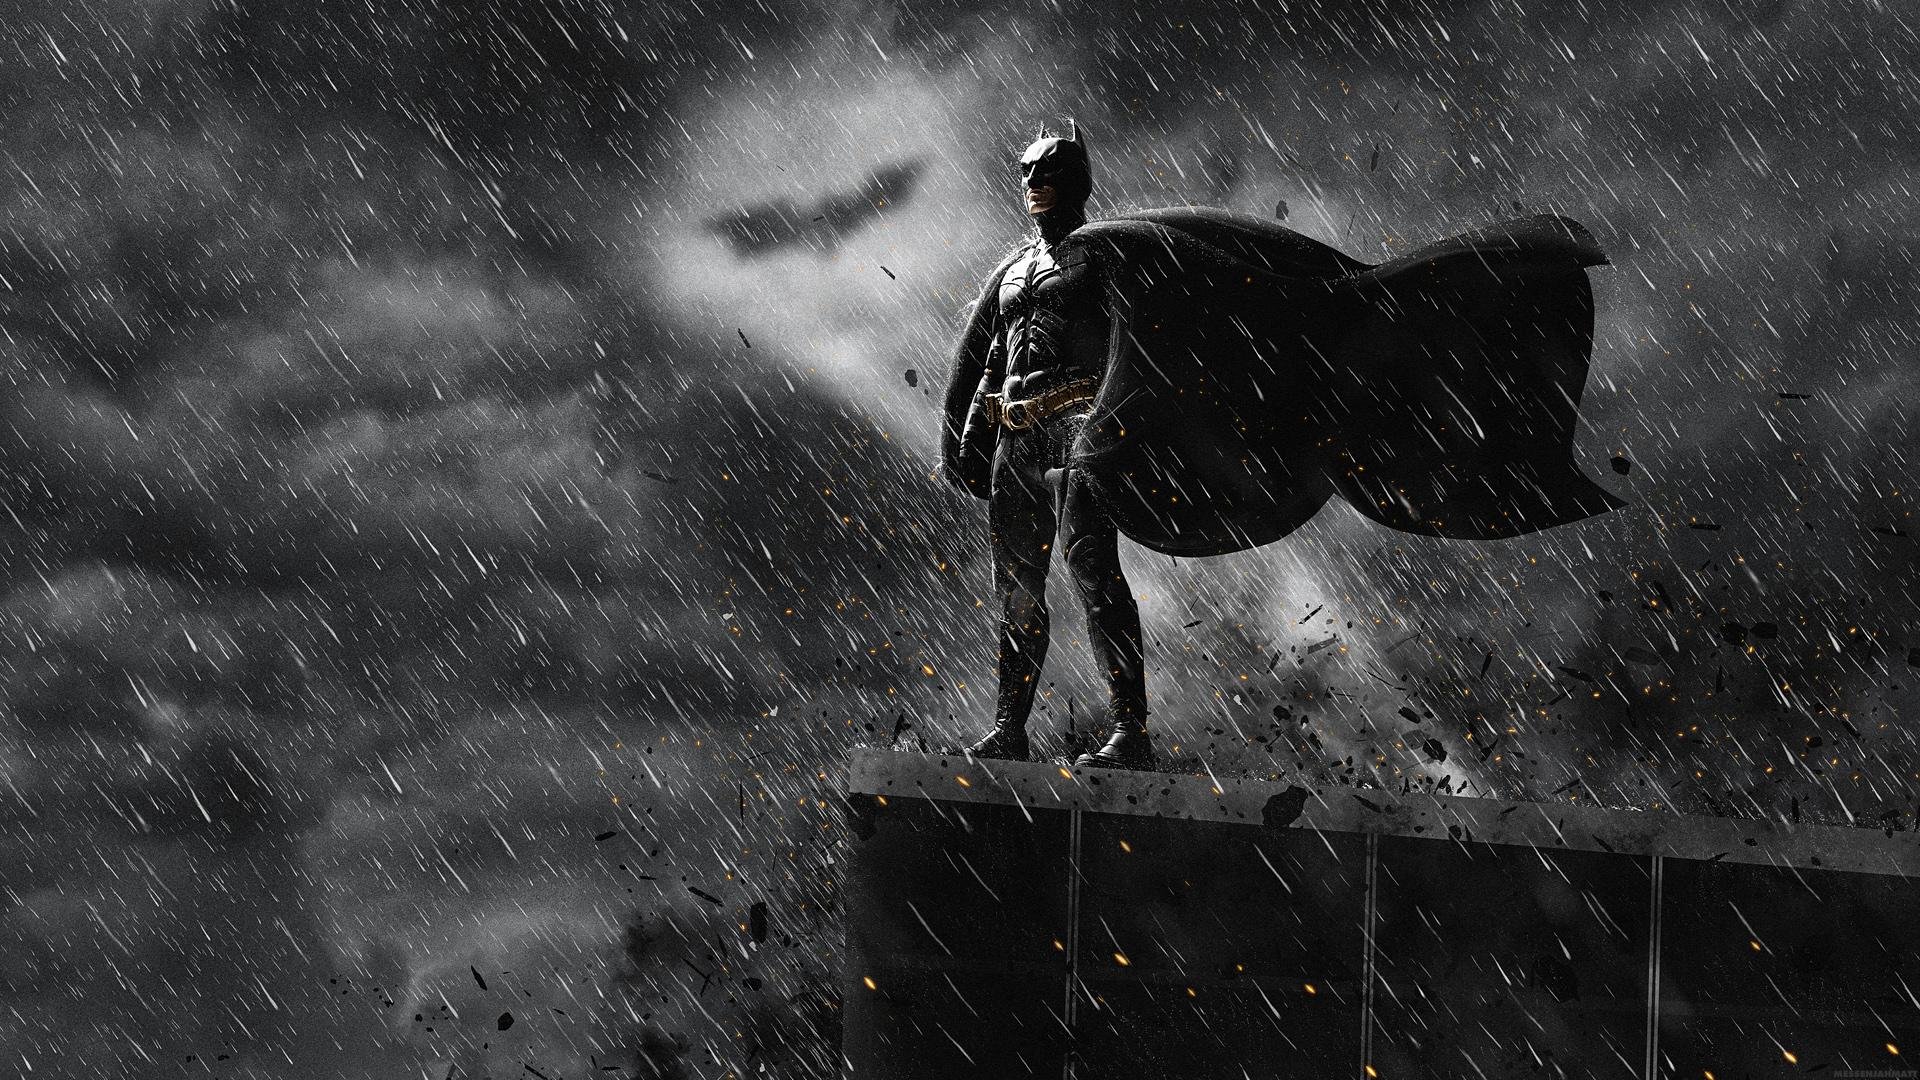 The Dark Knight Rises download the new version for mac